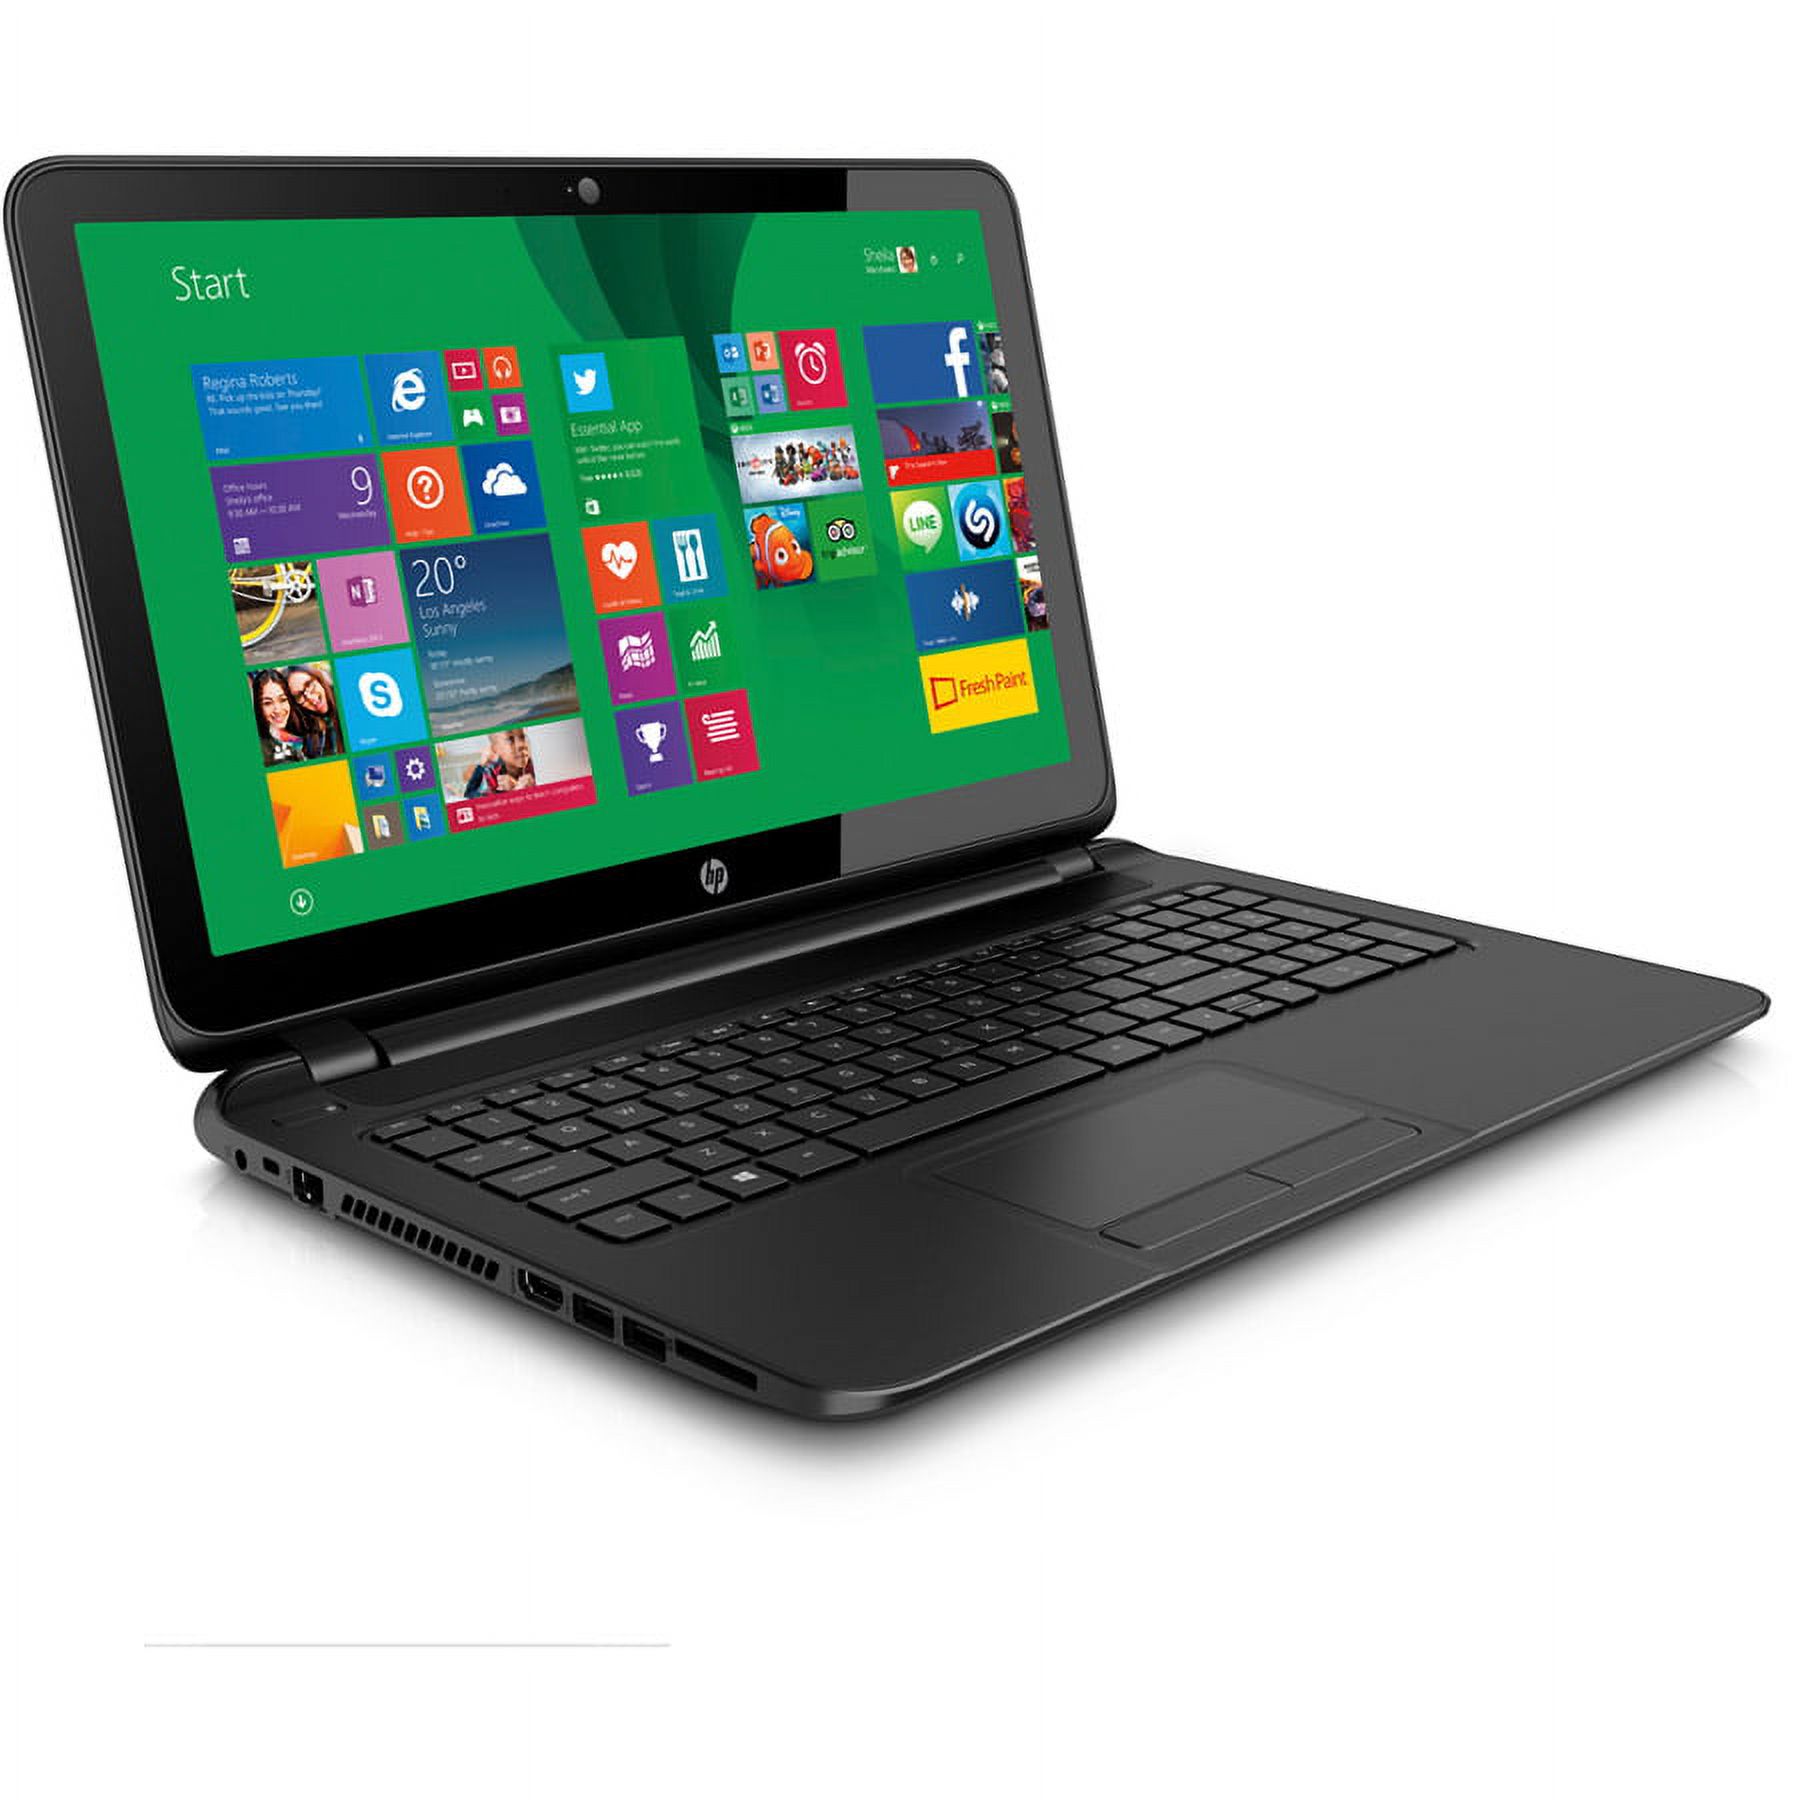 HP 15-F125WM Intel Celeron N2940 X4 1.83GHz 4GB 500GB DVD+/-RW 15.6" Win8.1, Black (Used) - image 2 of 4